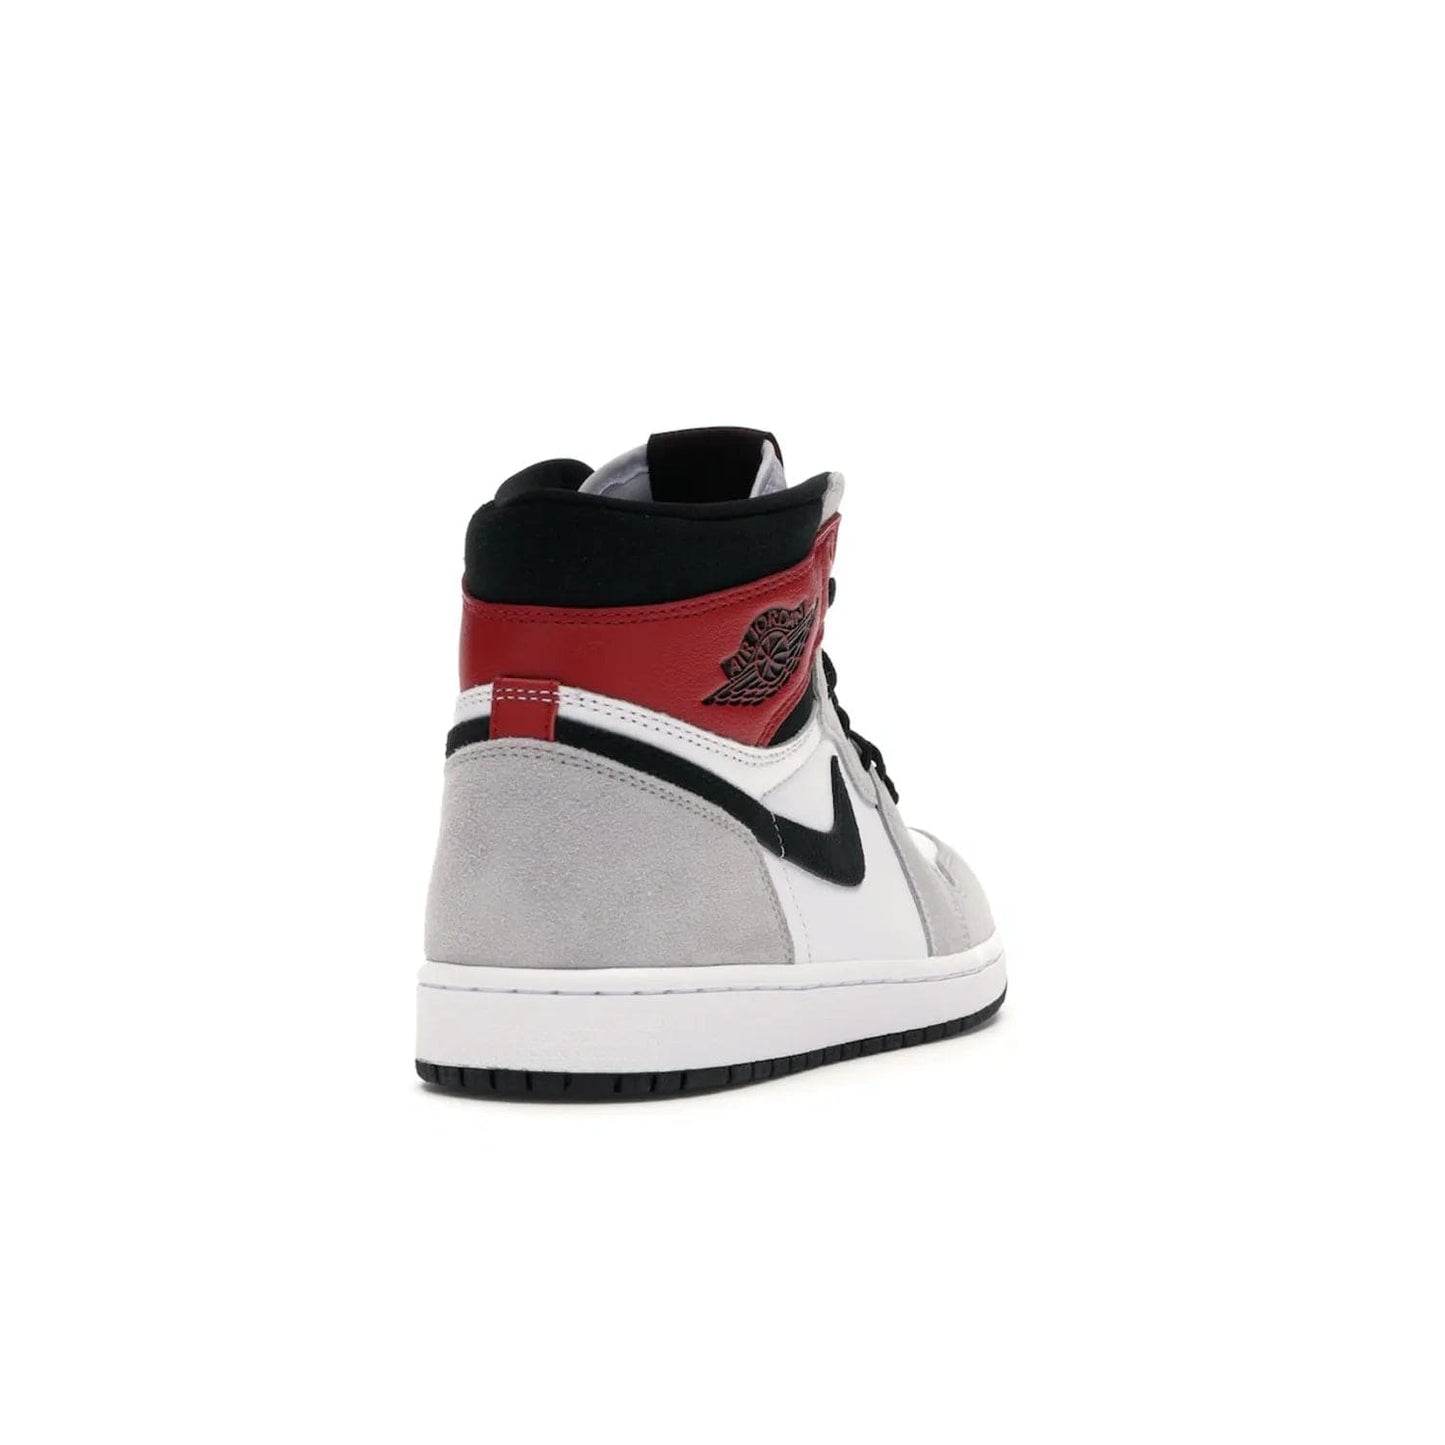 Jordan 1 Retro High Light Smoke Grey - Image 30 - Only at www.BallersClubKickz.com - Comfortable and stylish, Jordan 1 Retro High Light Smoke Grey offers a unique spin on a classic design. White leather, grey suede, red leather and black details are set on a white midsole and black outsole. Get the sneaker released in July 2020 and add a twist to your wardrobe.